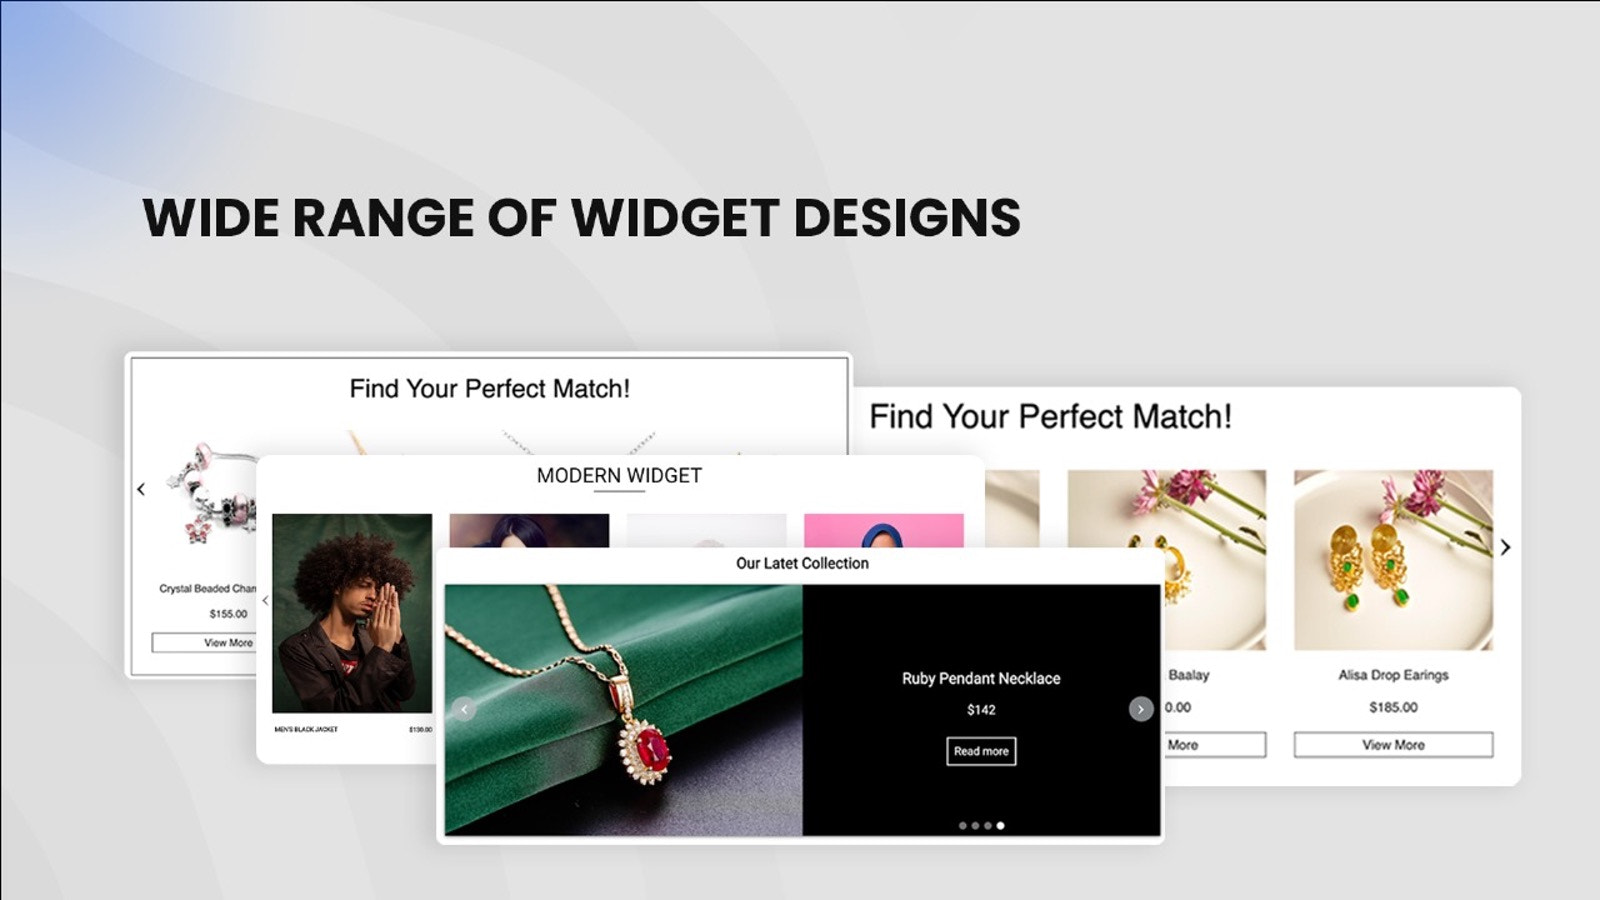 Wide range of widget designs available to choose from